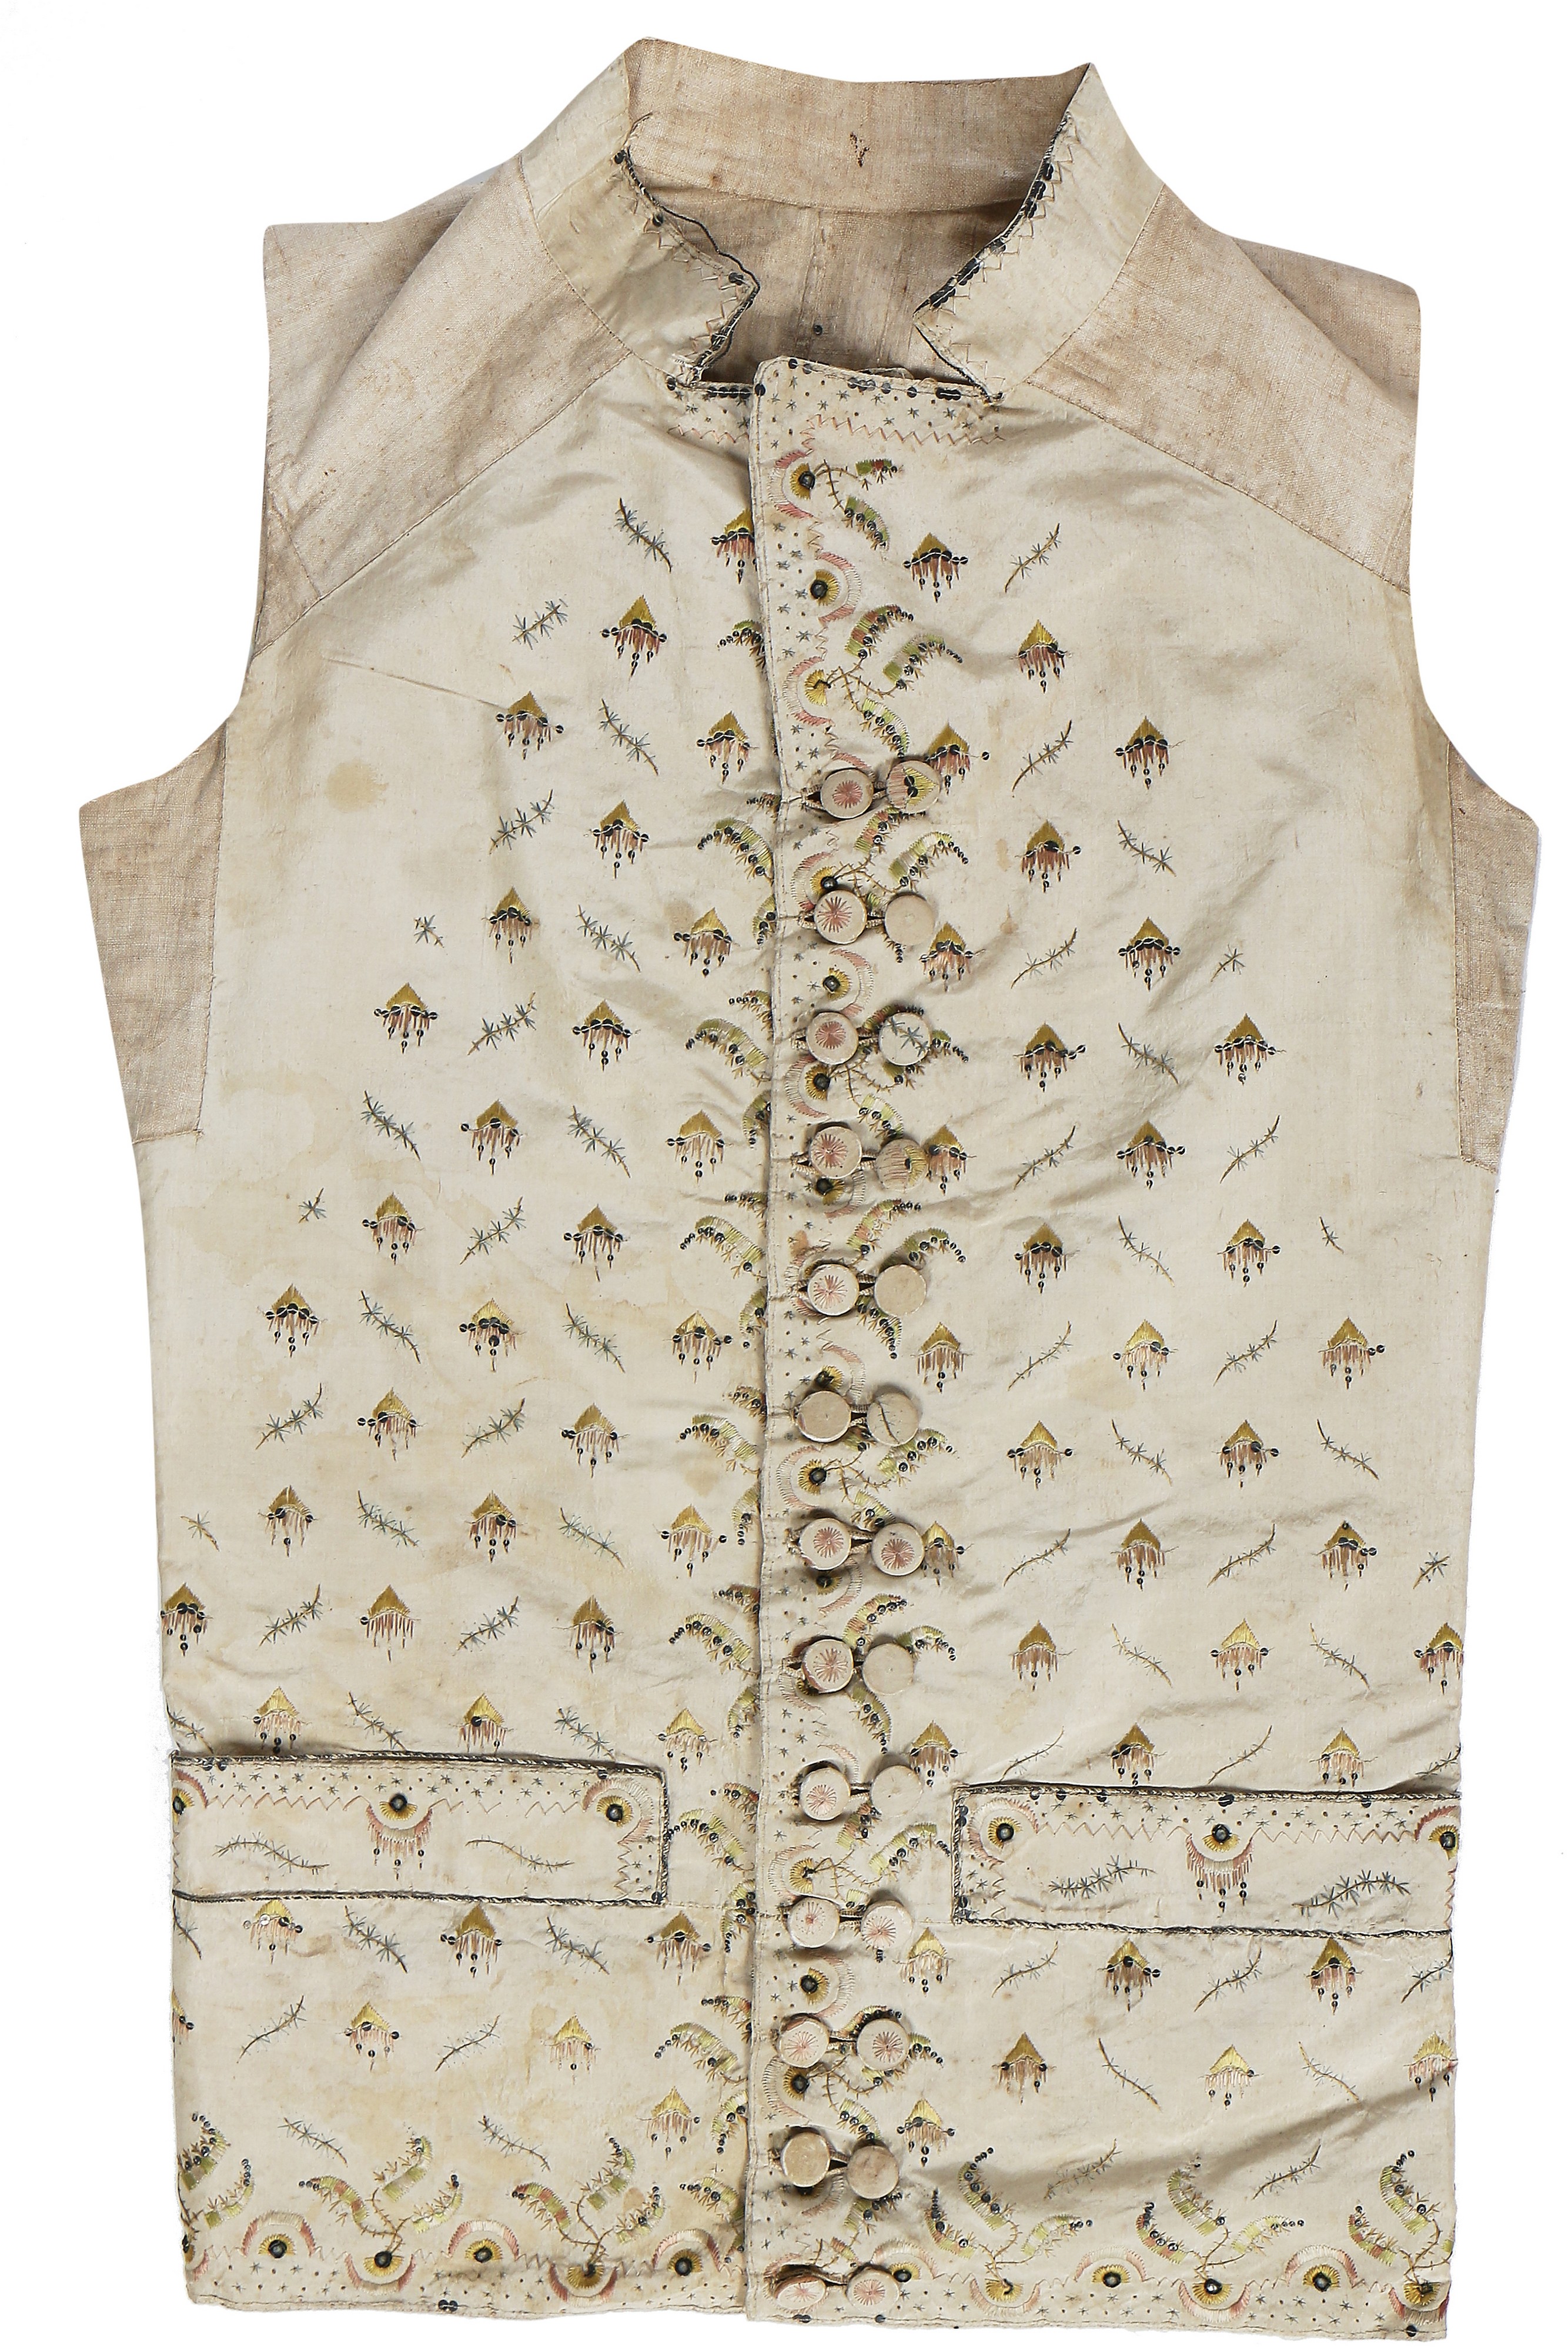 A Late 18th Or Early 19th Century European Gentleman's Silk Waistcoat,  Finely Embroidered With Flowers 47cm X 70 Cm Mounted In A Glazed Frame, 19th Century Waistcoat